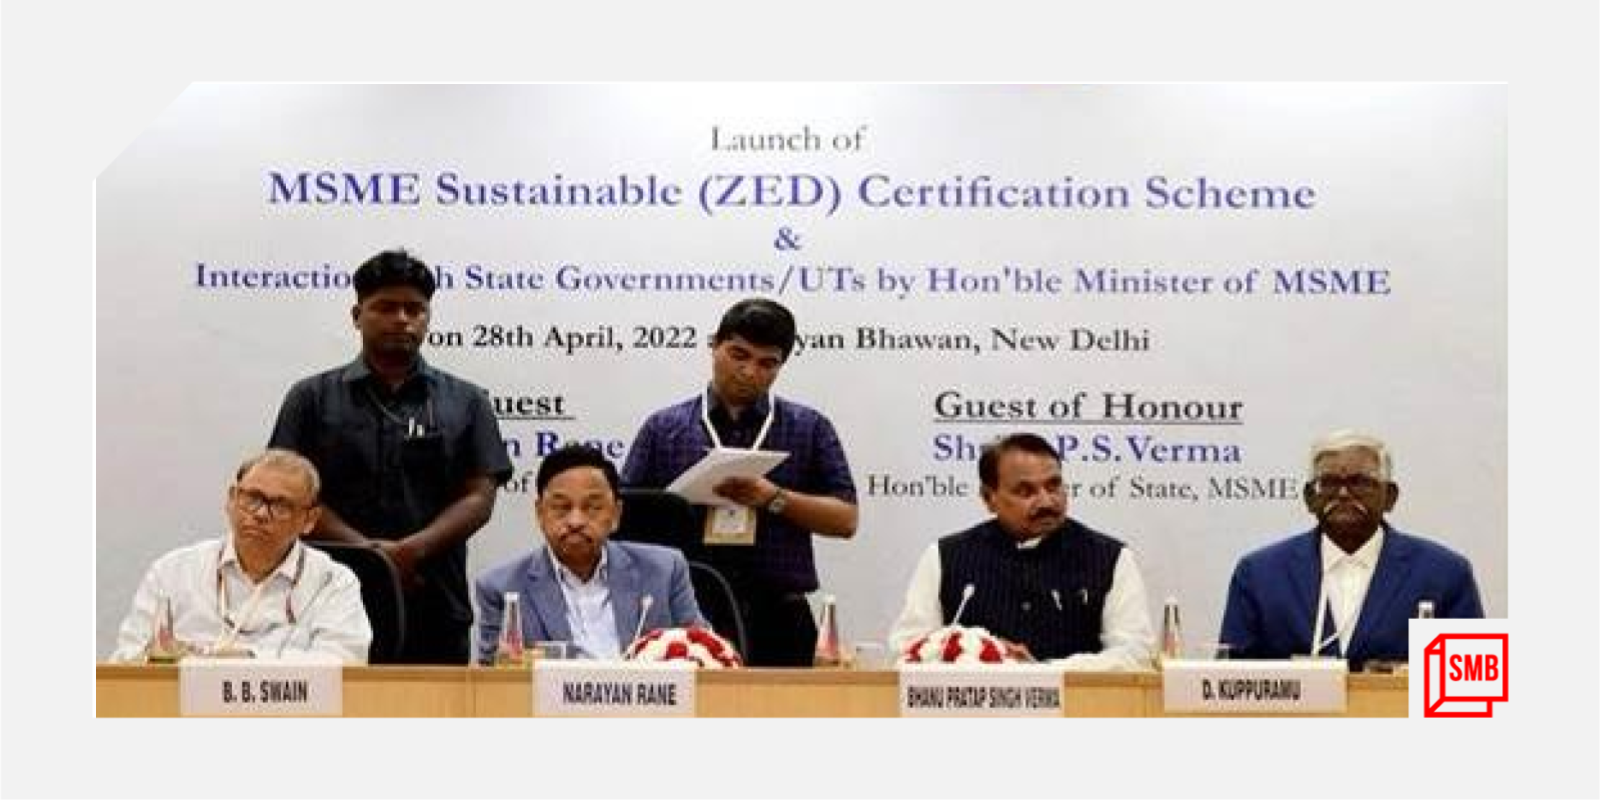 Narayan Rane launches MSME Sustainable (ZED) Certification Scheme to make manufacturers ‘environmentally conscious’